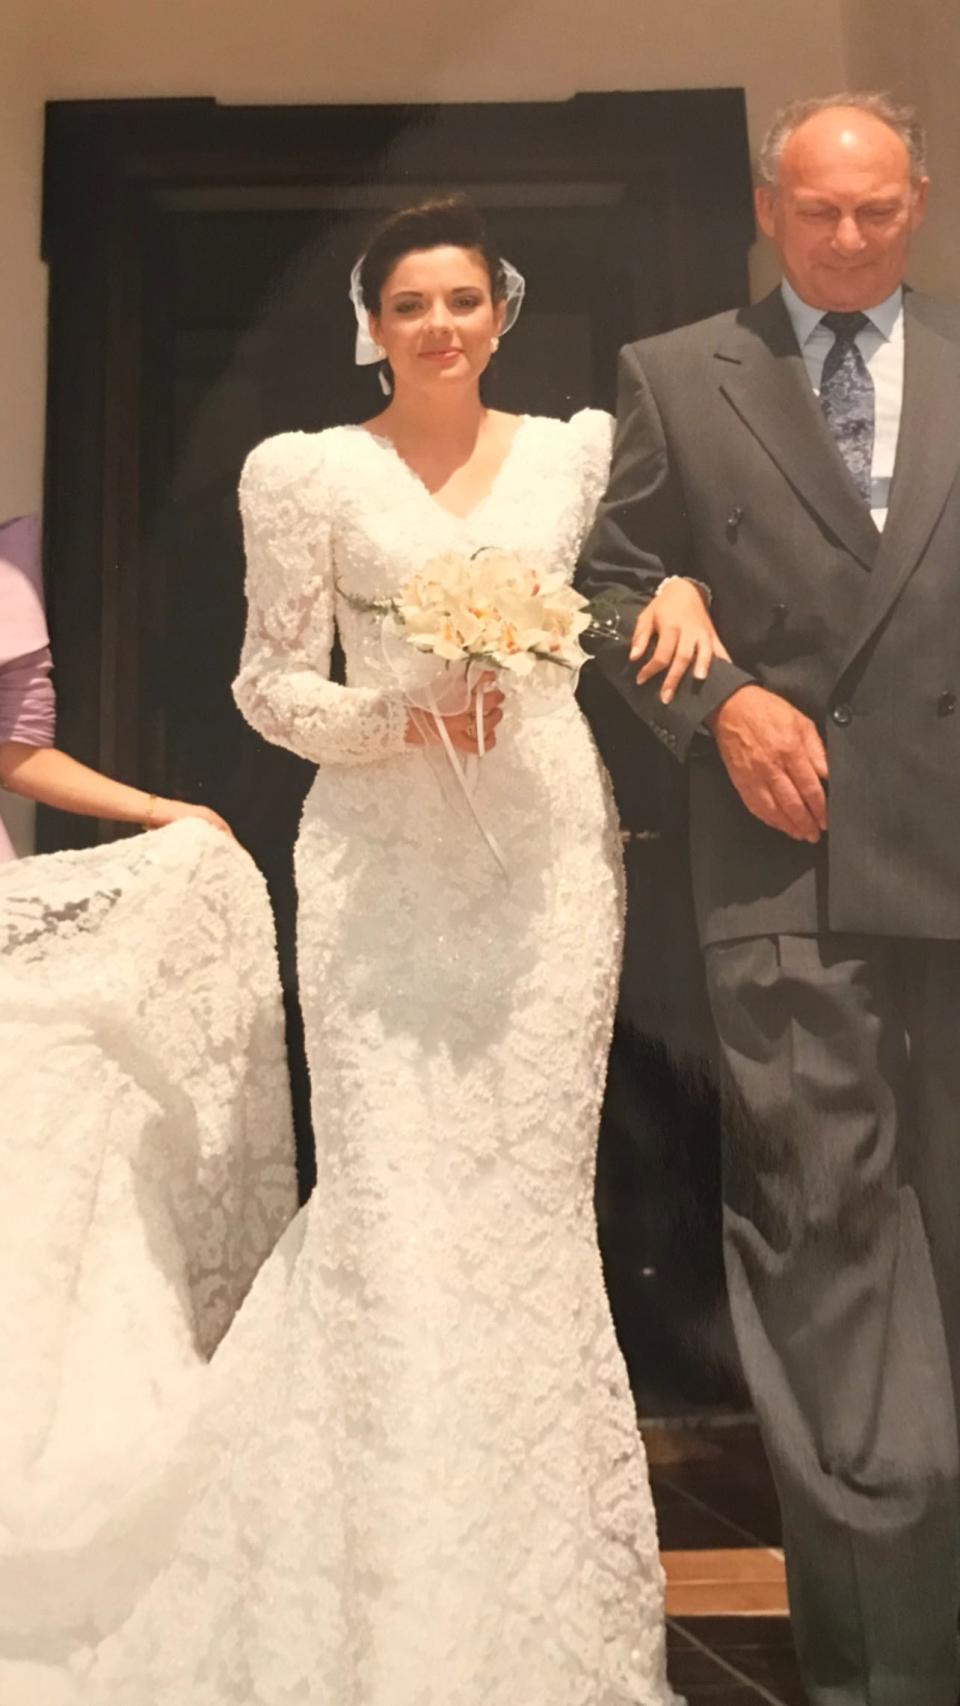 A photo of Rapp's mother from her wedding.